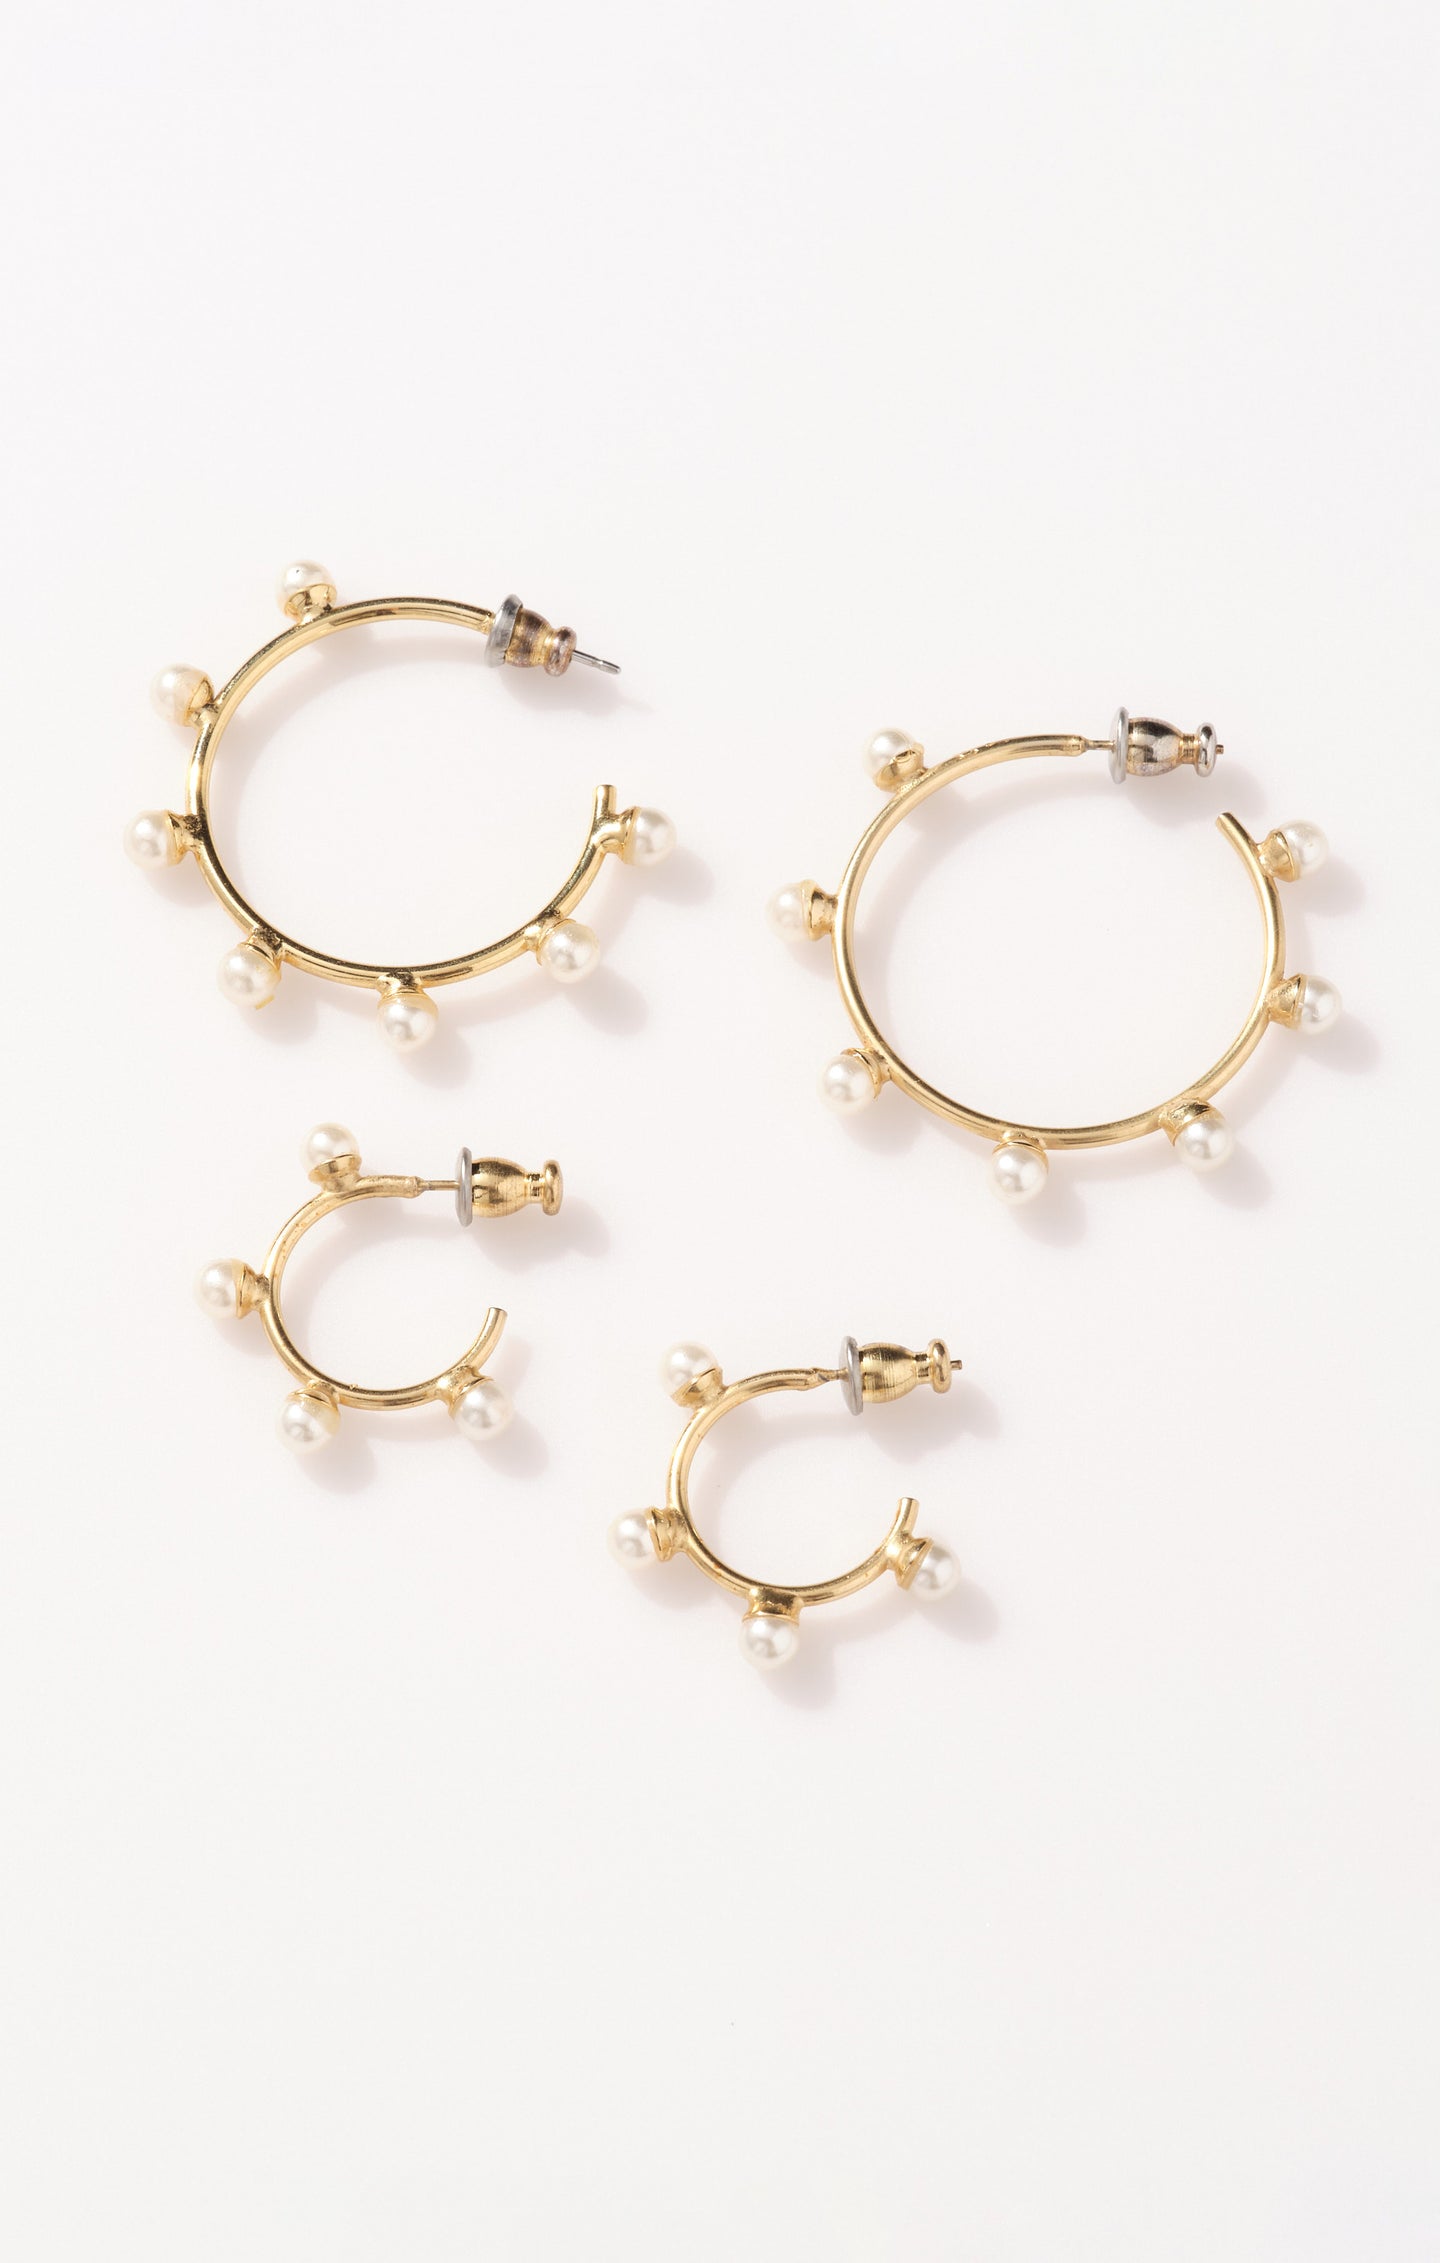 Amazon.com: Big Gold Hoop Earrings for Women 40mm, 24K Real Gold Plated  Trendy Cute Dainty Twisted Medium Dangle Thin Hoops Hypoallergenic Earrings  Jewelry Gifts: Clothing, Shoes & Jewelry